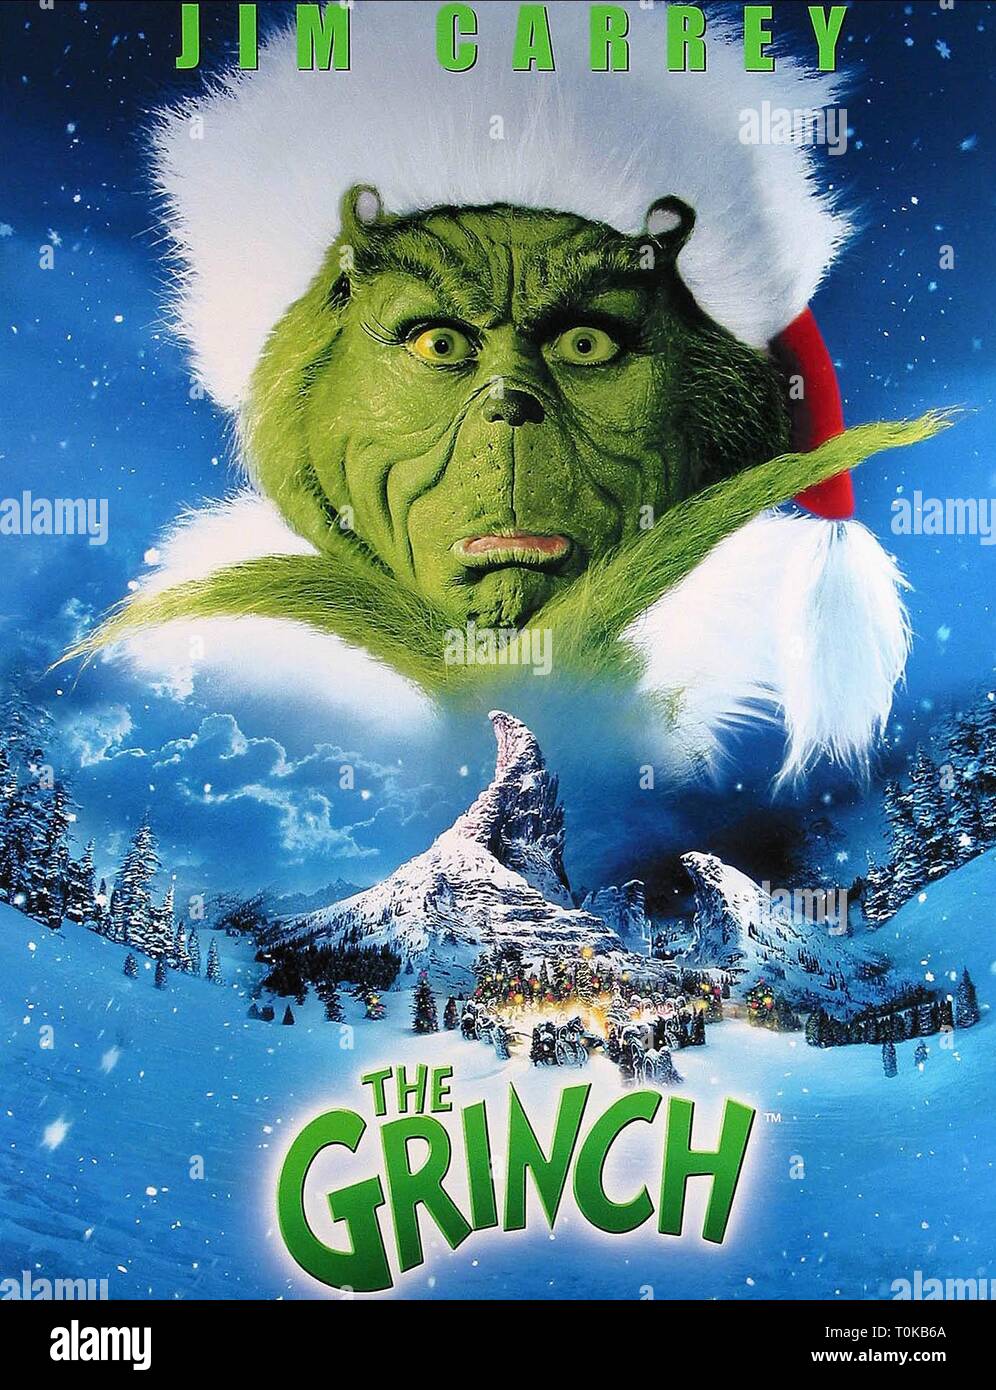 JIM CARREY, HOW THE GRINCH STOLE CHRISTMAS, 2000 Stock Photo - Alamy